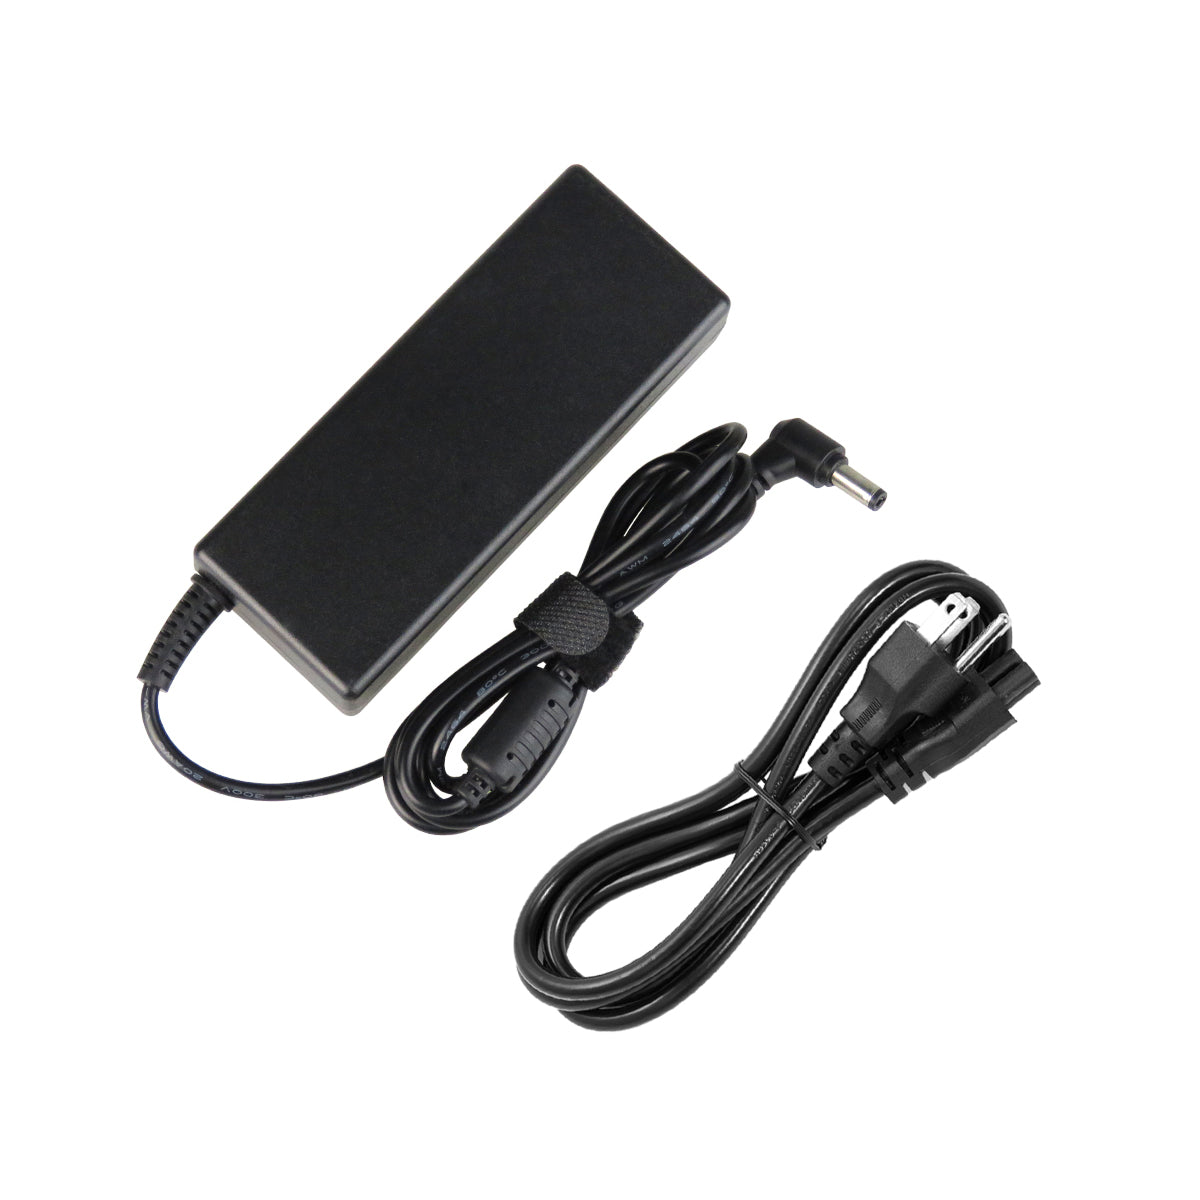 AC Adapter Charger for ASUS X55C-WH31 Notebook.